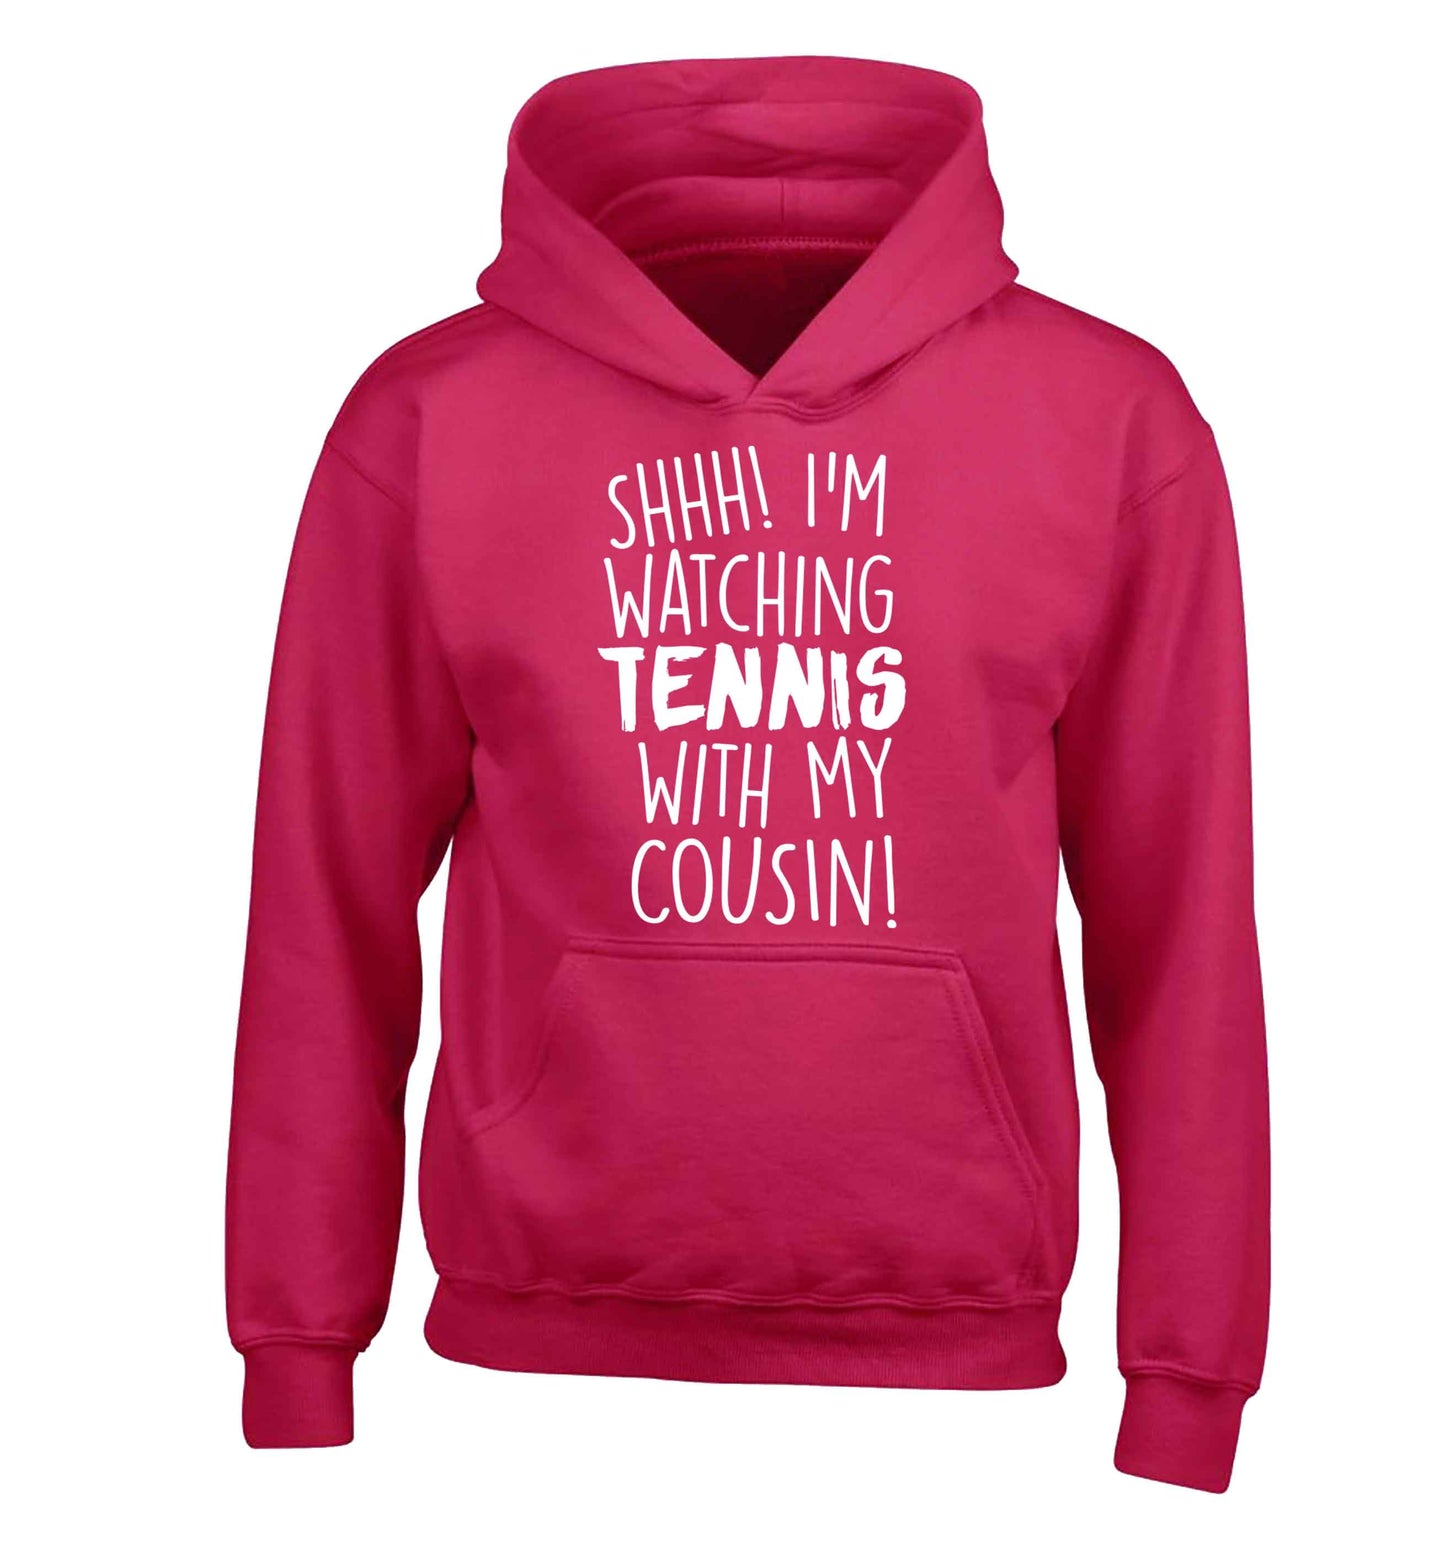 Shh! I'm watching tennis with my cousin! children's pink hoodie 12-13 Years